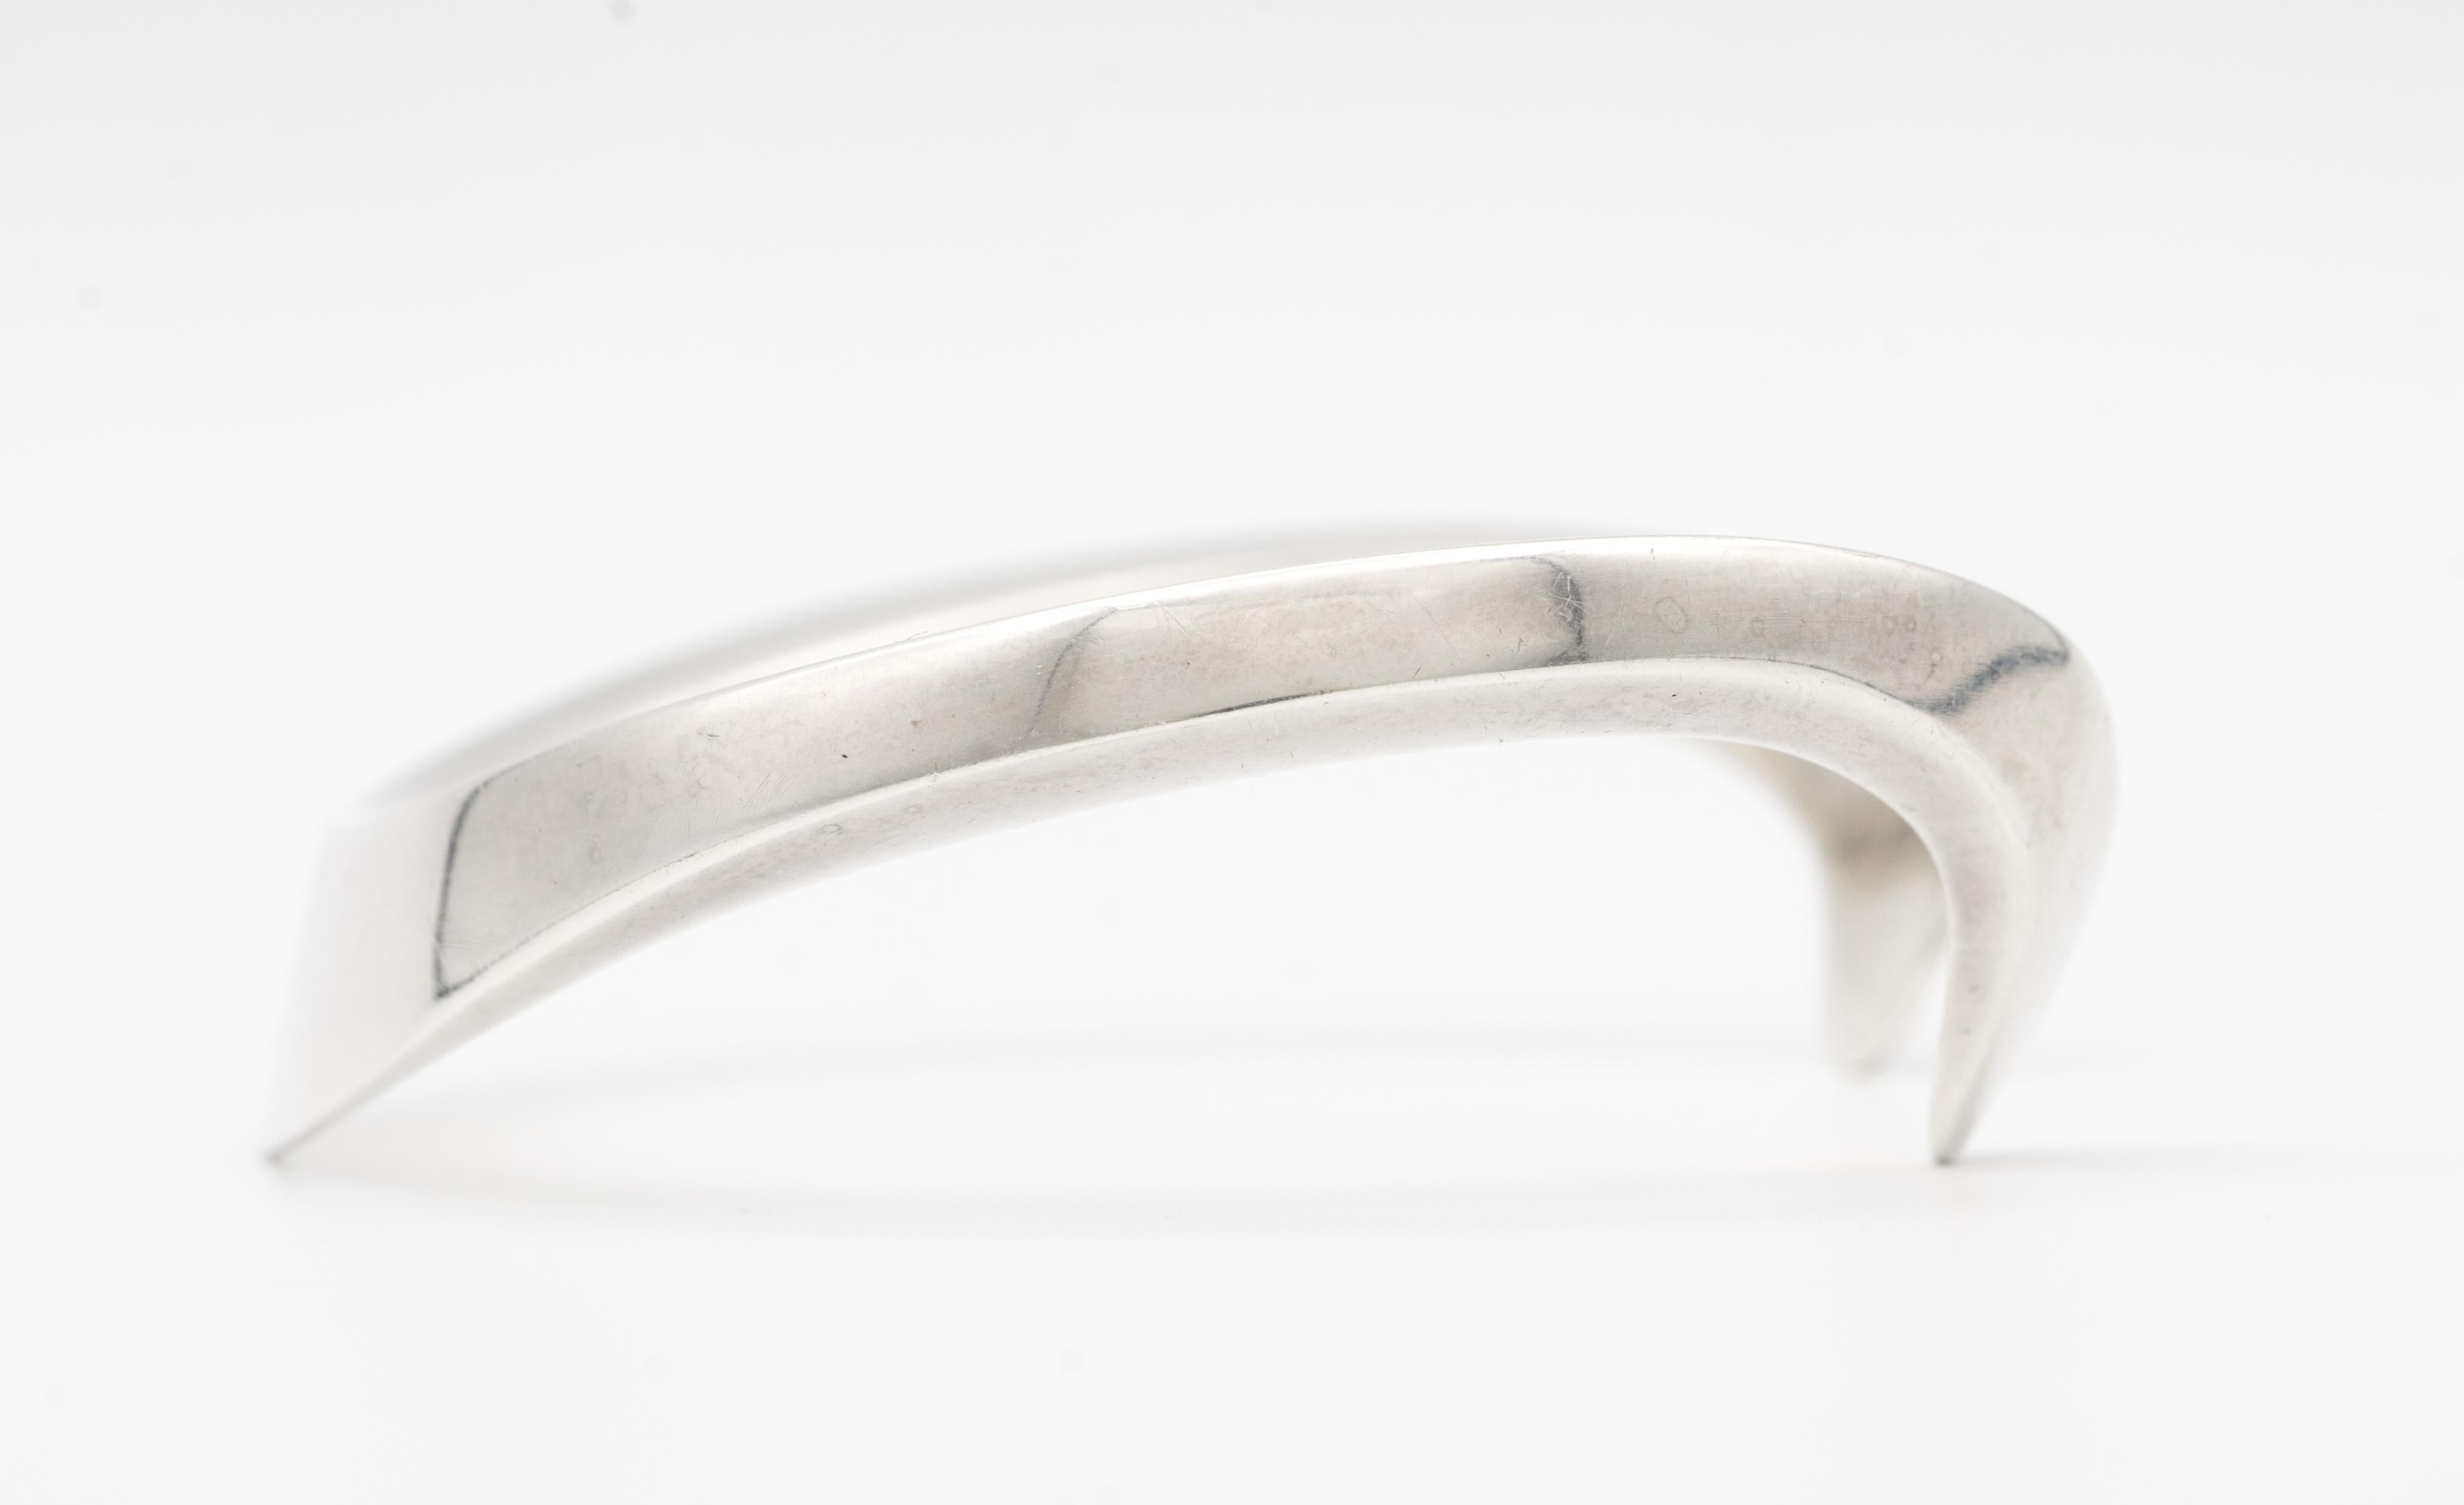 Vintage Georg Jensen Silver Cuff Ove Wendt Design- 1970's


Weight: 44.7 grams
Inside Width: 2.75 inches x 2.5 inches
Thickness: Ranges from .25 inches to .9 inches
Condition: Minor scratches , original patina 

Free Overnight express shipping